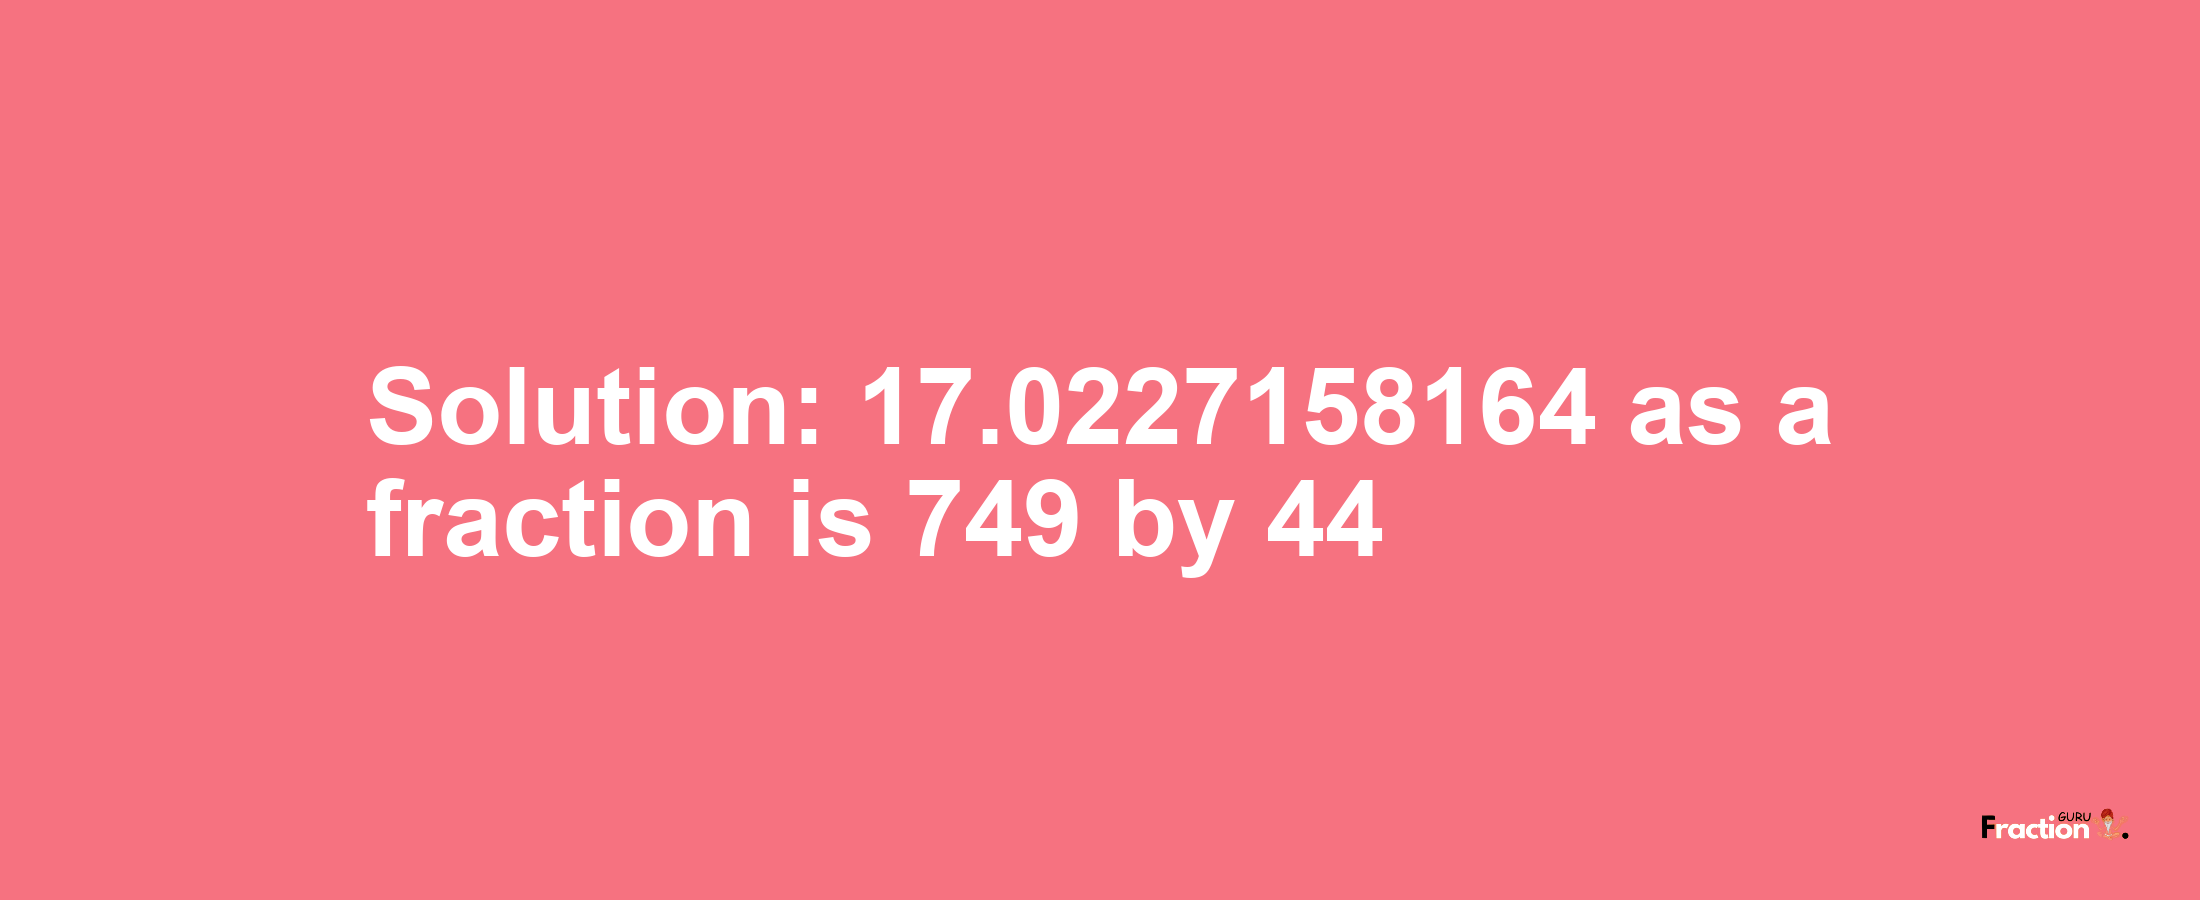 Solution:17.0227158164 as a fraction is 749/44